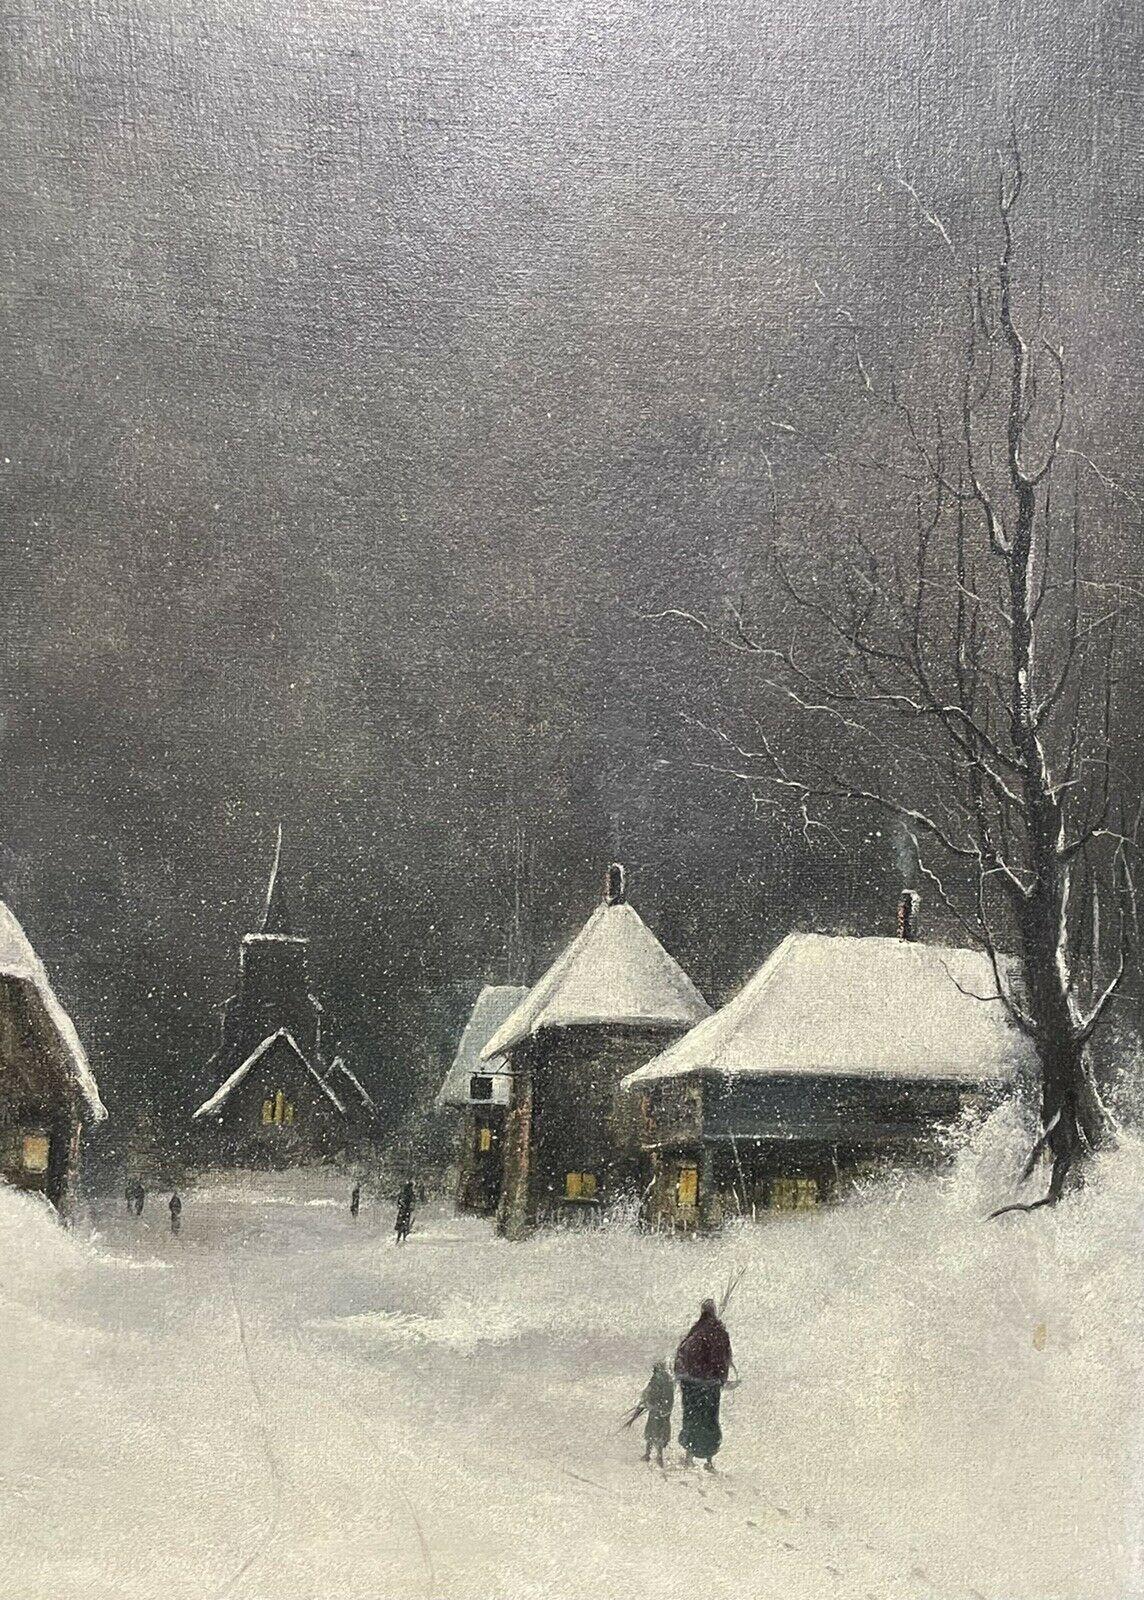 SIGNED ORIGINAL OIL PAINTING - FIGURES WALKING THROUGH WINTER SNOW VILLAGE PATH - Gray Landscape Painting by Nils Hans Christiansen